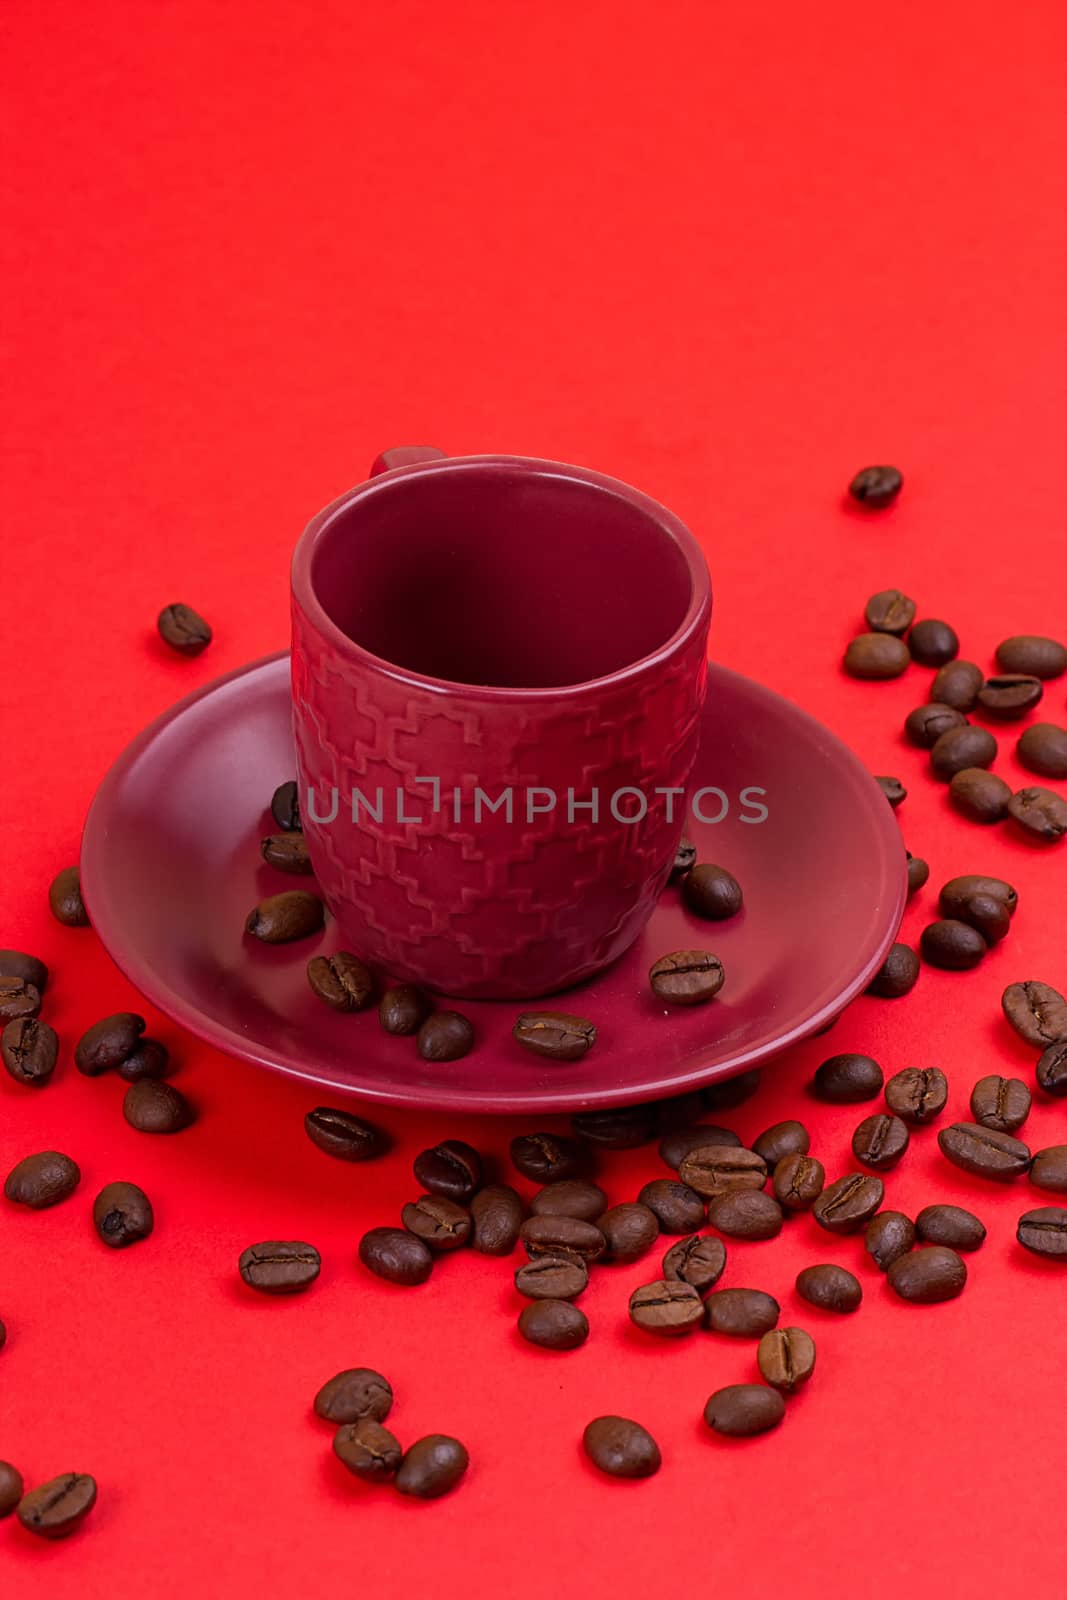 Empty coffee cup and coffee beans by victosha